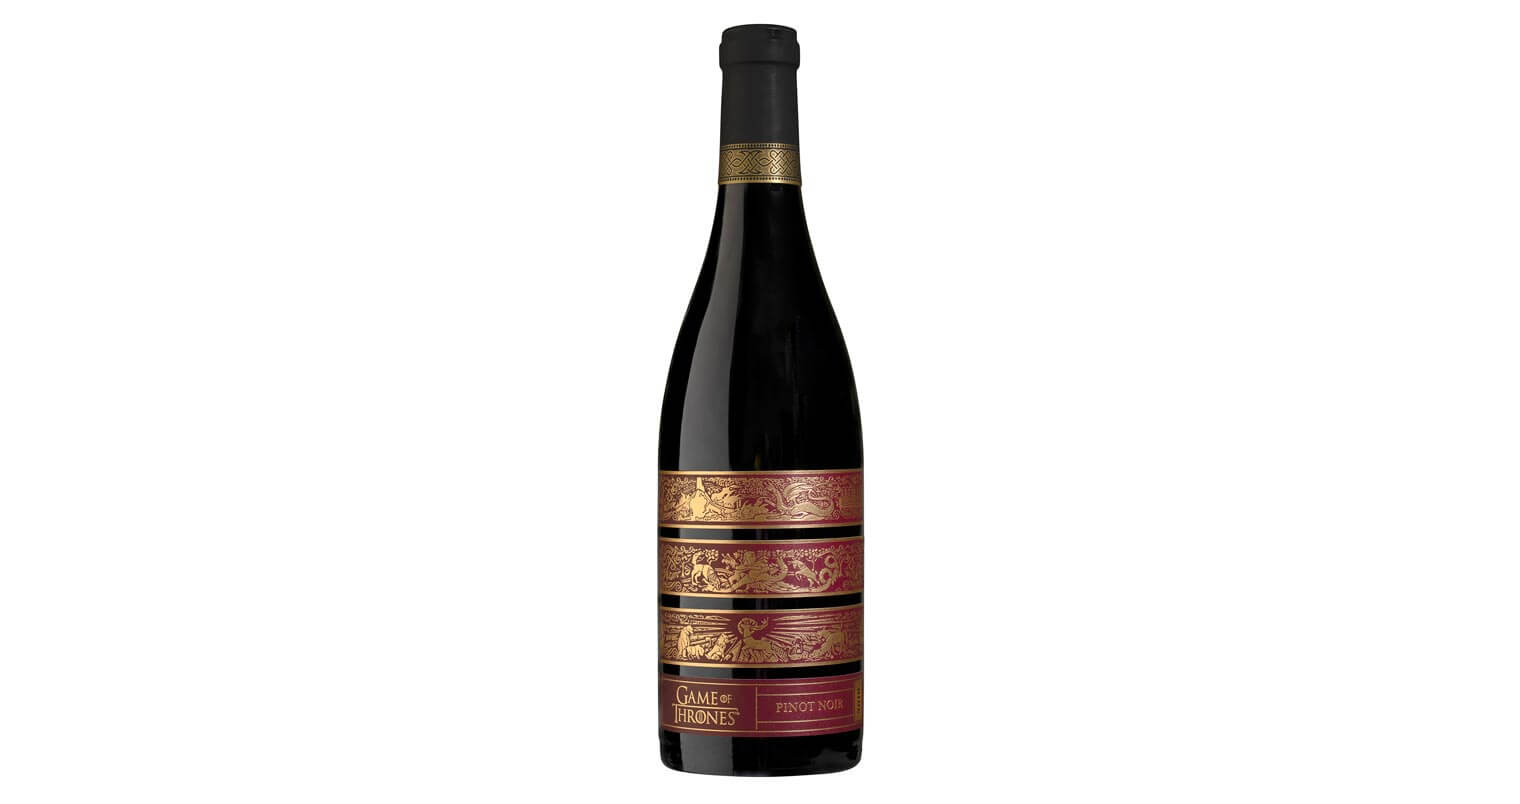 Game of Thrones Wine Pino Noir, bottle on white, featured image